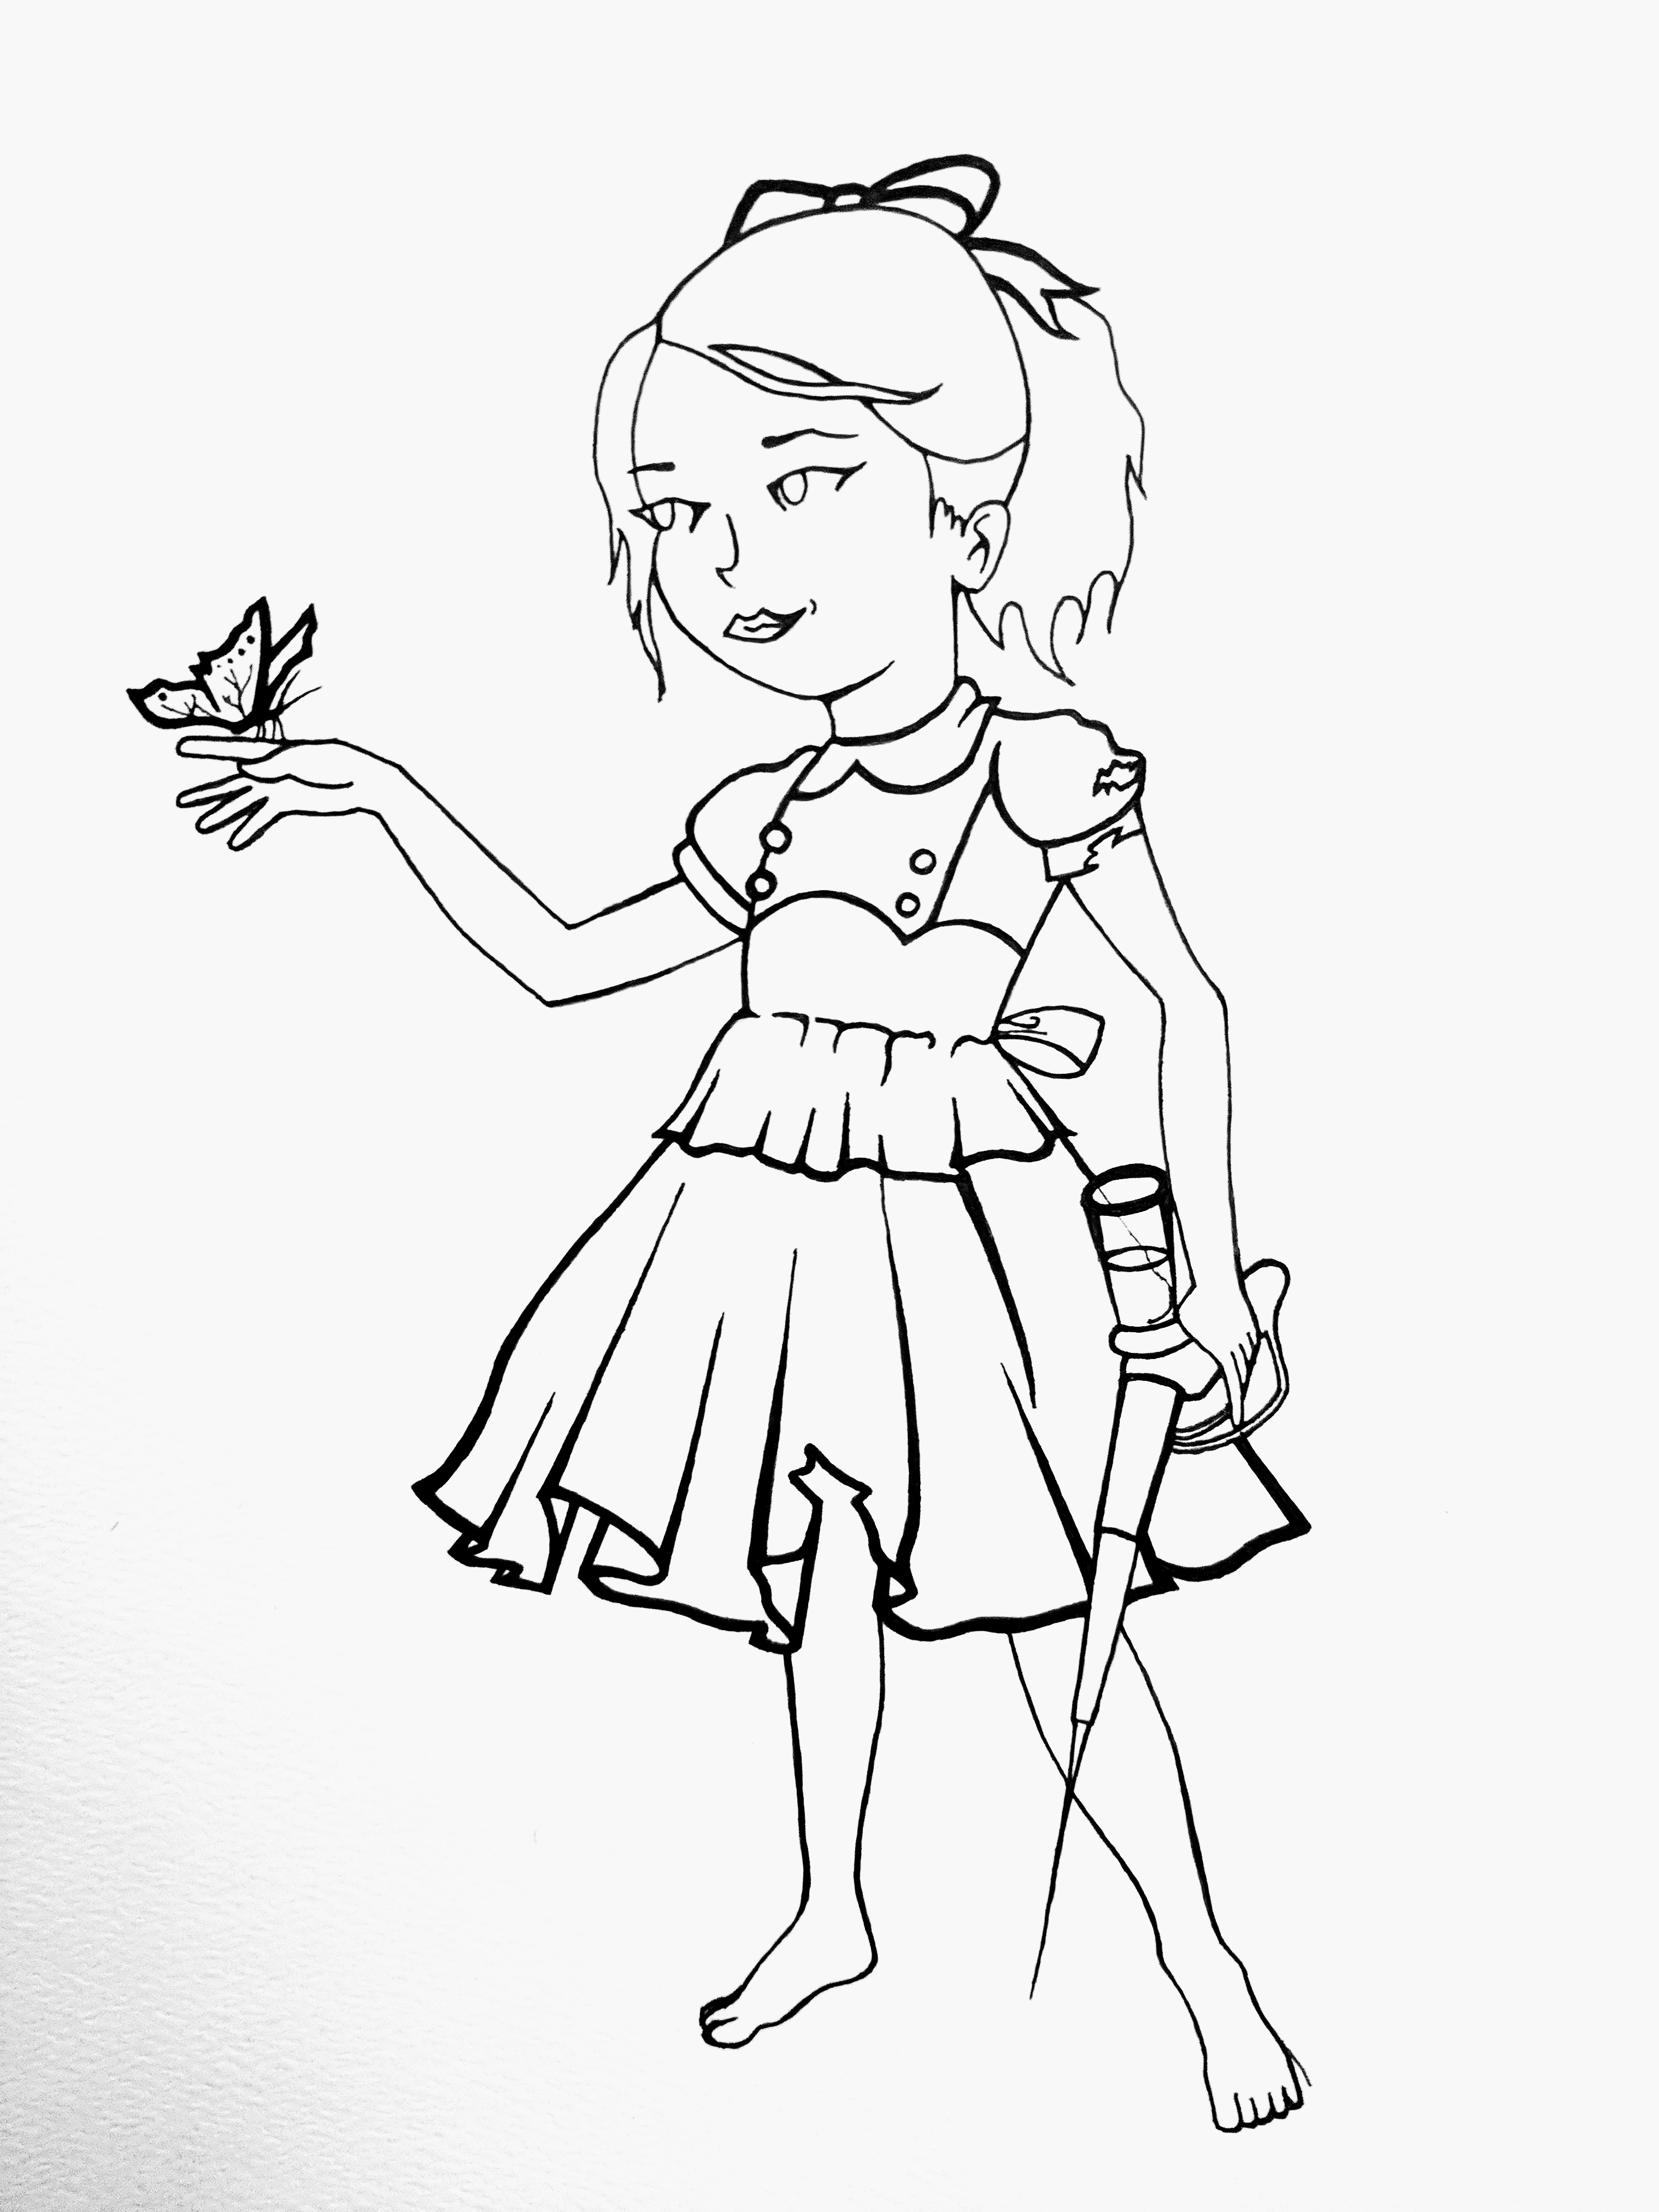 Little Sister from Bioshock with a butterfly